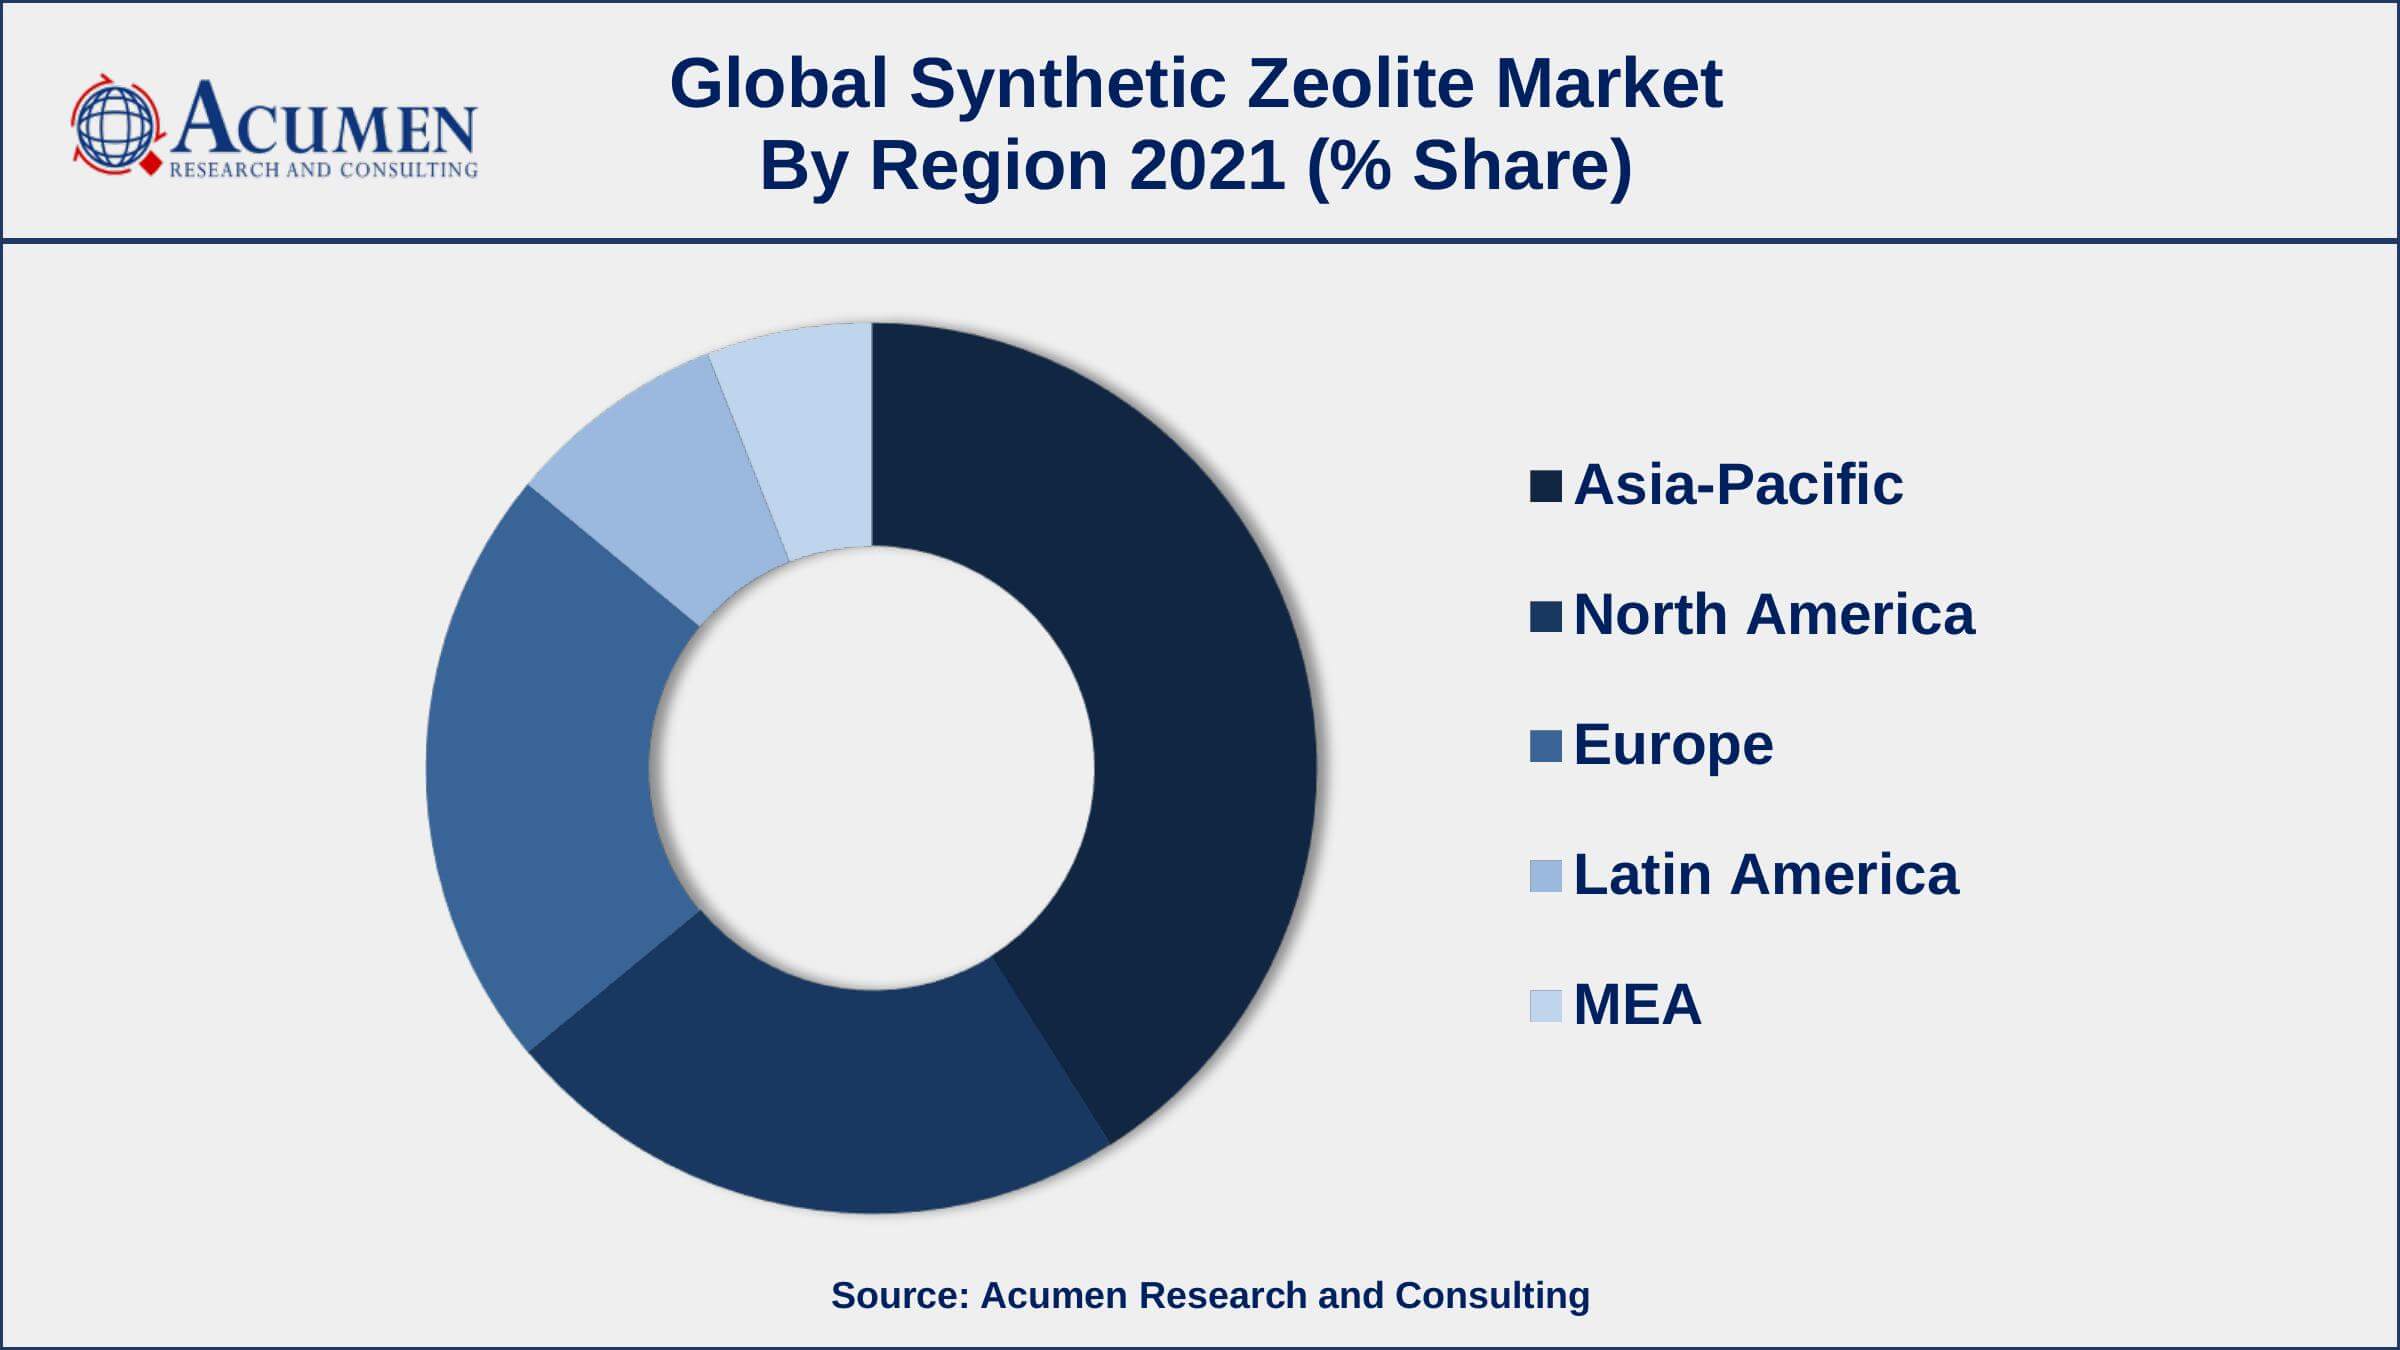 Growing environmental concerns about the zeolite, drives the synthetic zeolite market size